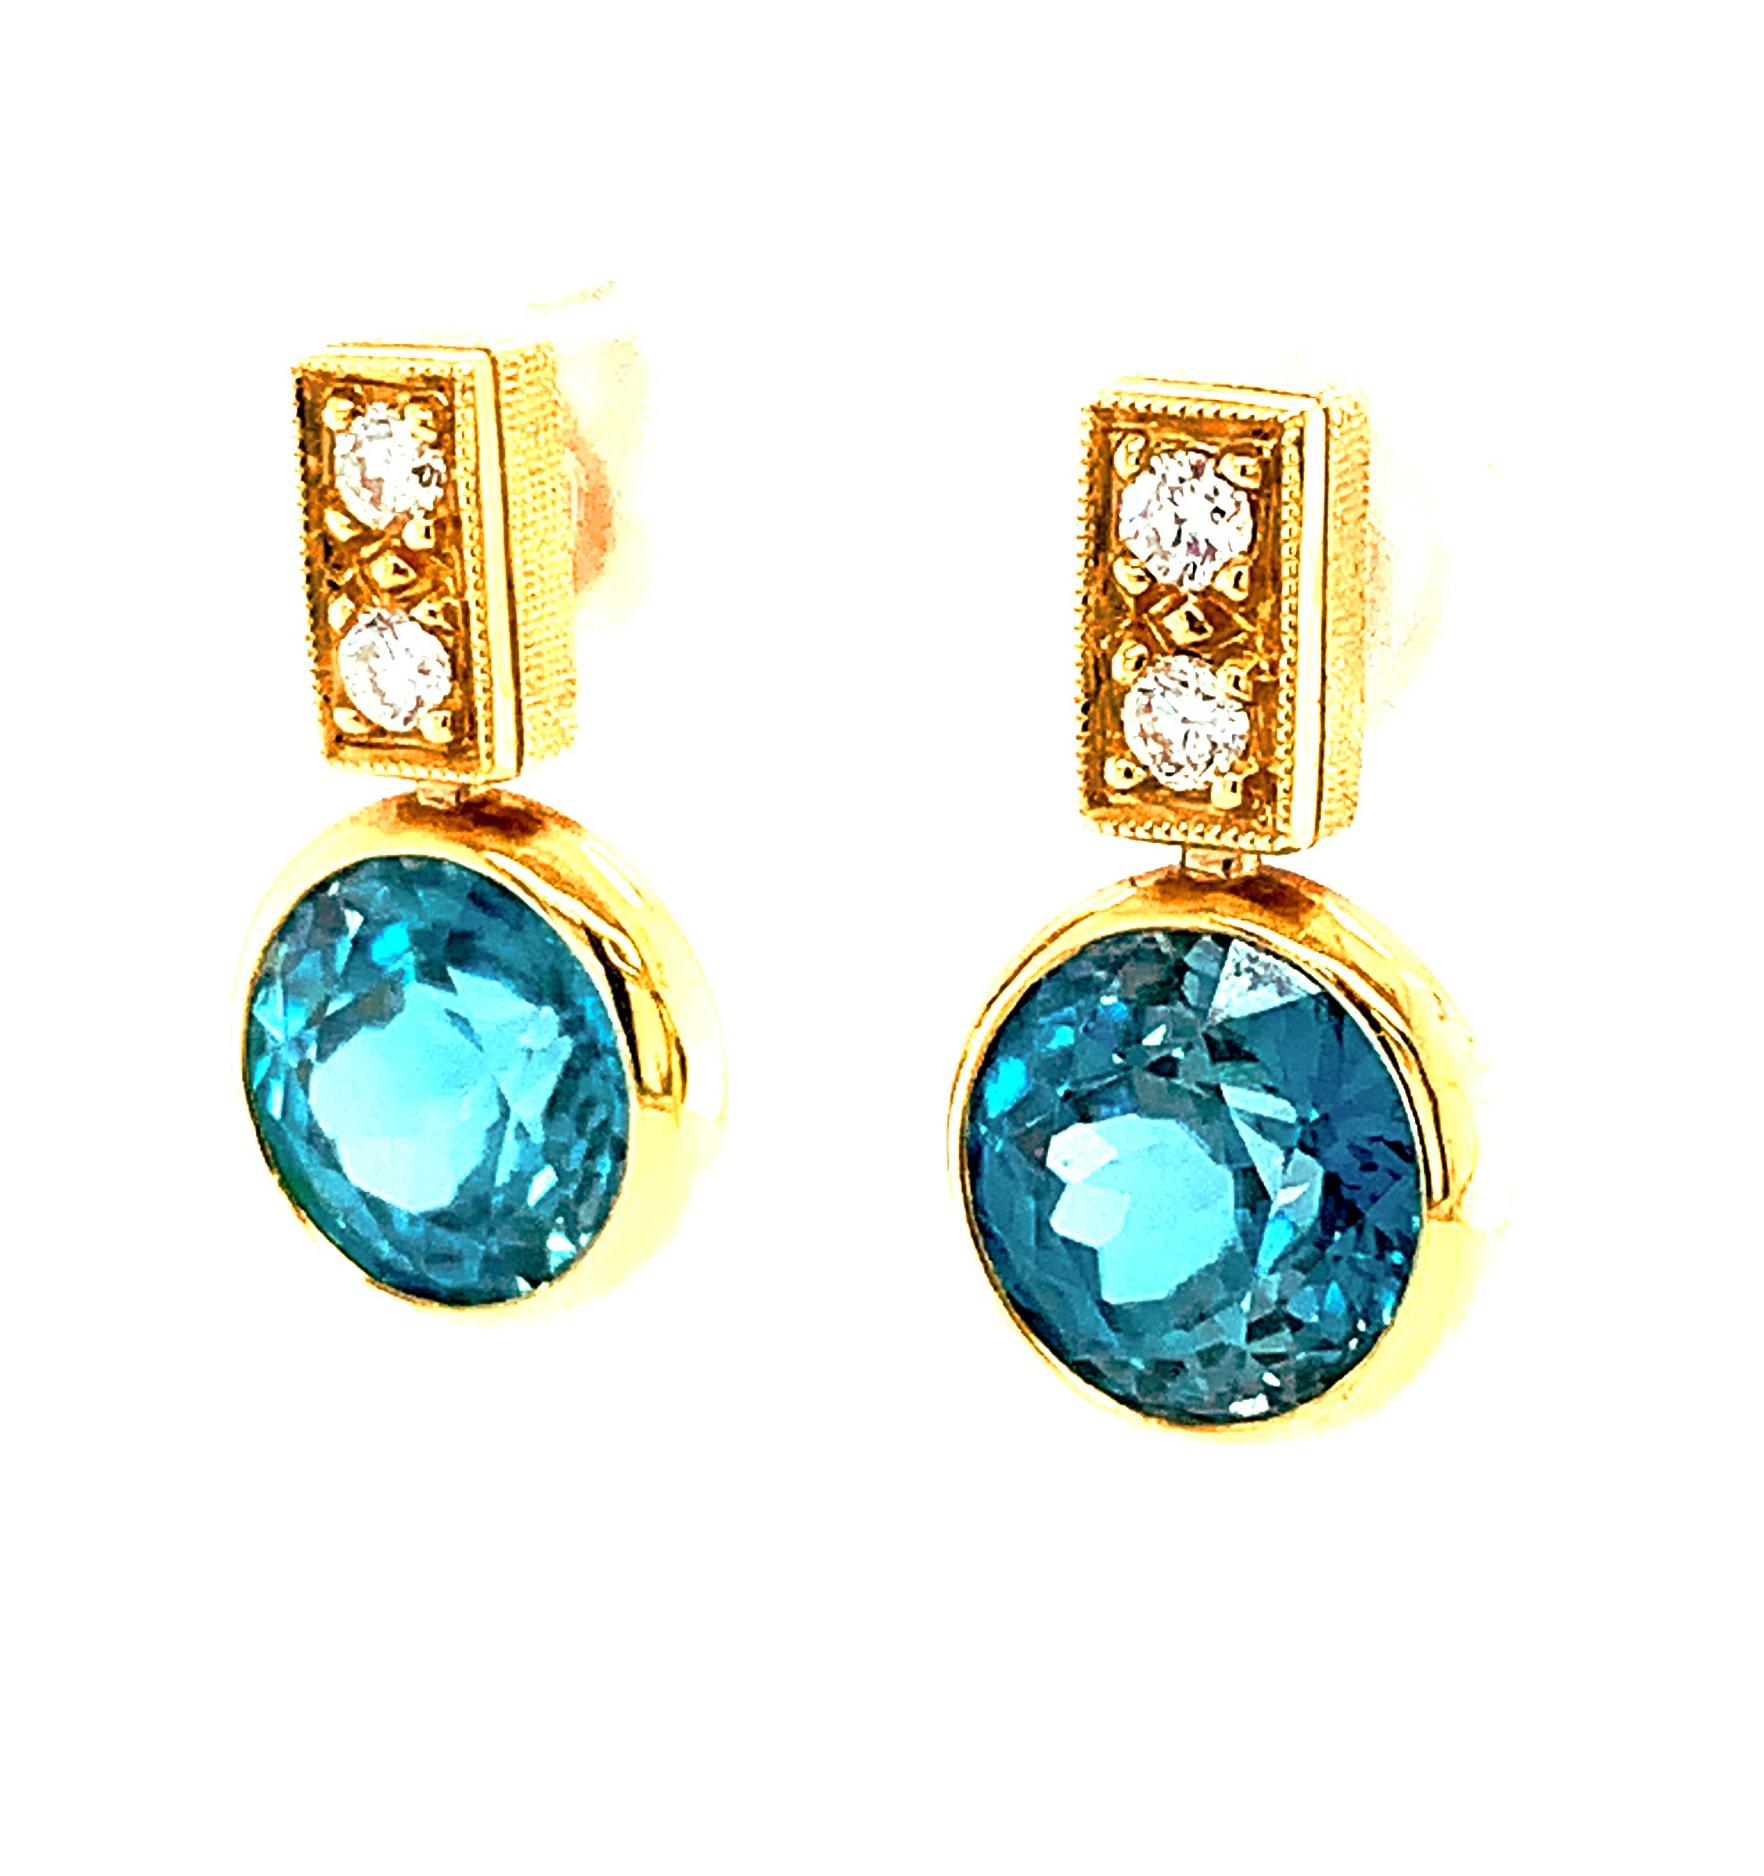 These beautiful drop earrings feature a gorgeous pair of gem-quality blue zircons set with diamonds in 18k yellow gold. It is rare to find a matched pair of large, round blue zircons with such vibrant color! This pair weighs 9.64 carats and packs a